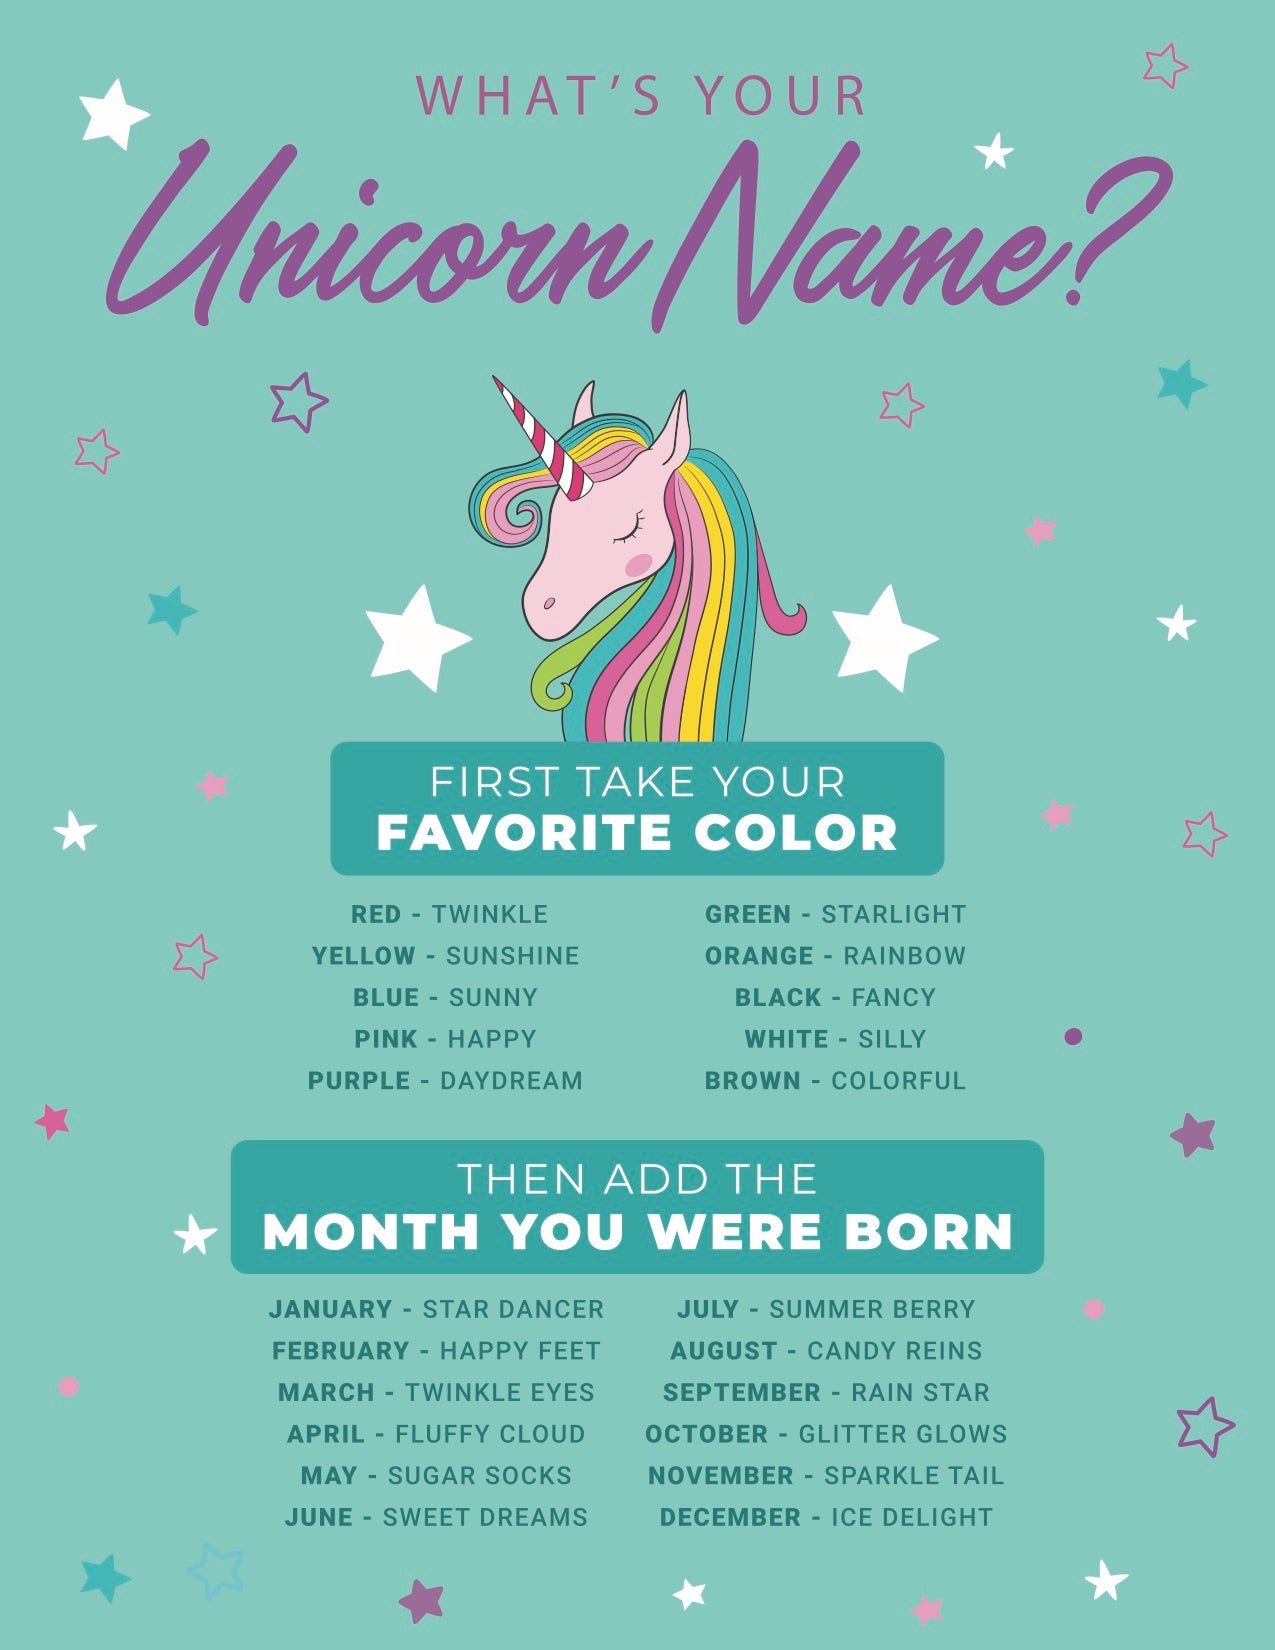 Teal 'What's Your Unicorn Name?' Free Printable – Pop Fizz Designs